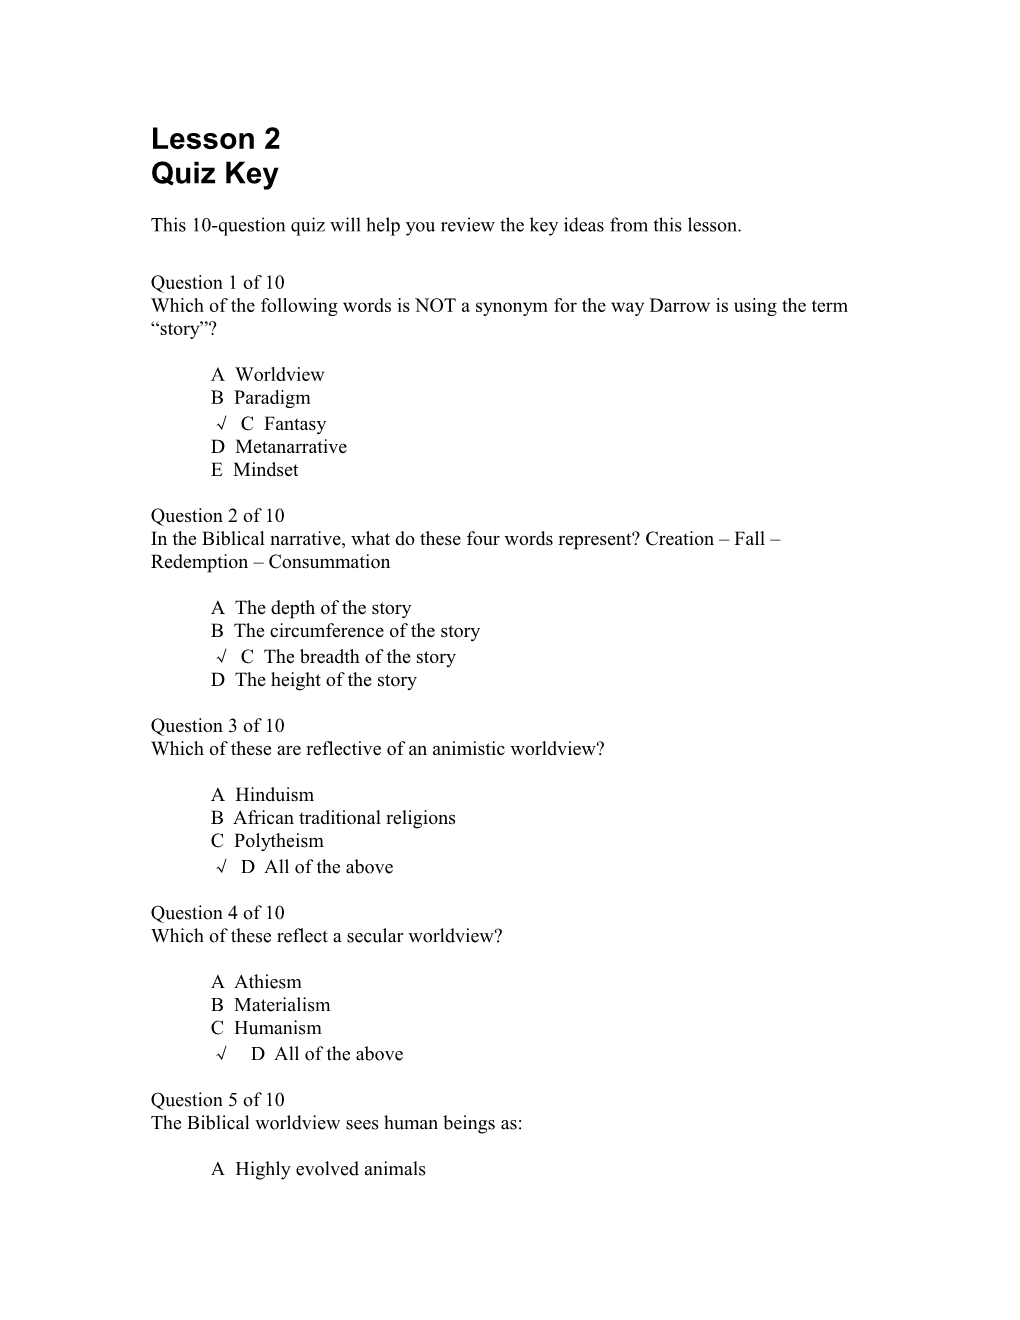 This 10-Question Quiz Will Help You Review the Key Ideas from This Lesson